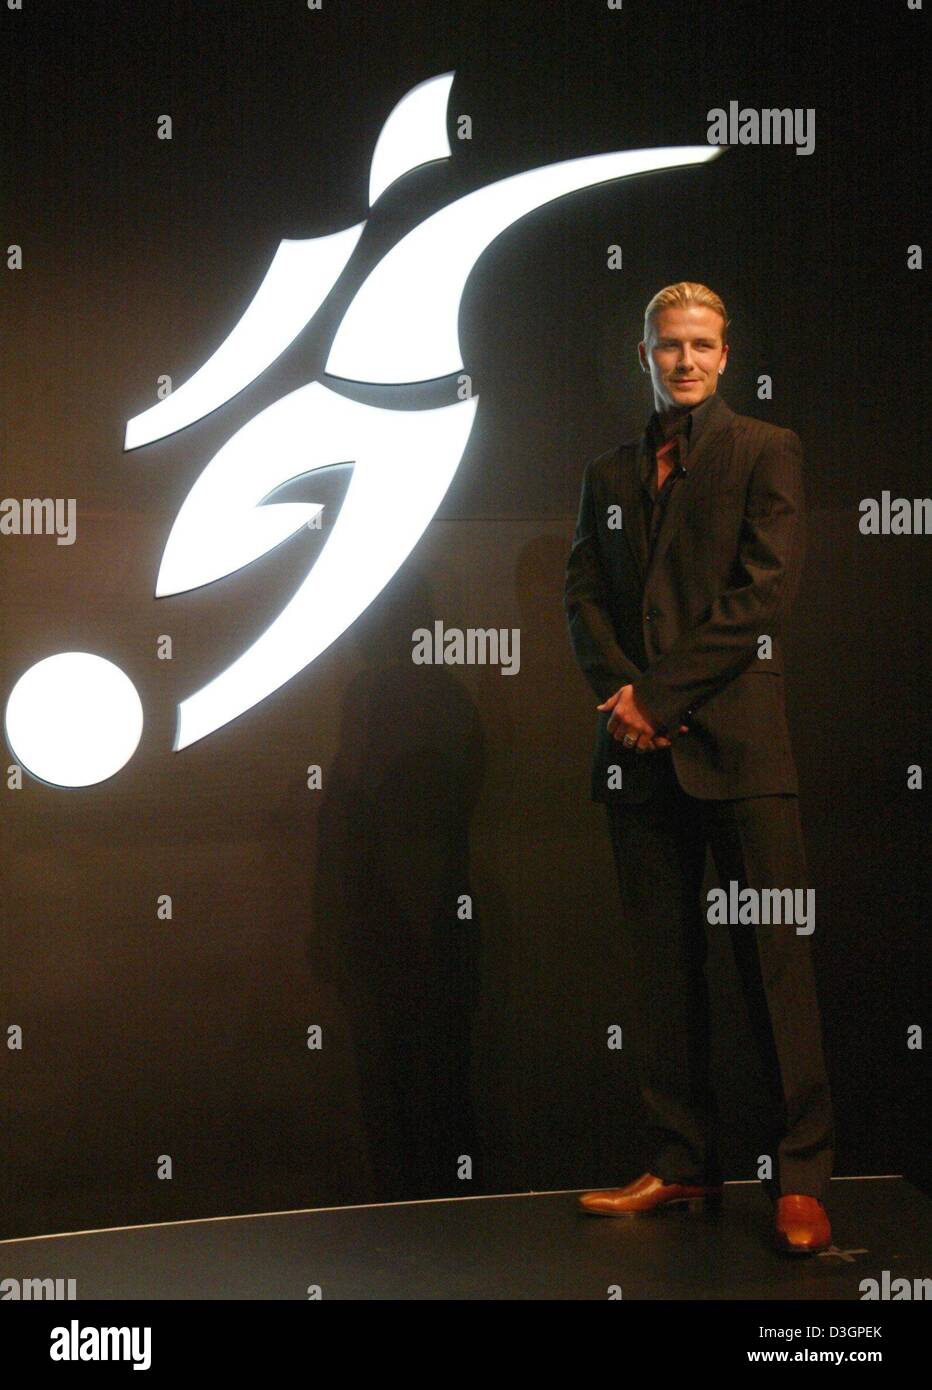 dpa) English soccer star David Beckham poses for the photographers in front  of his new logo at the Adidas headquarters in Herzogenaurach on Wednesday,  3 March, 2004. The design of the logo